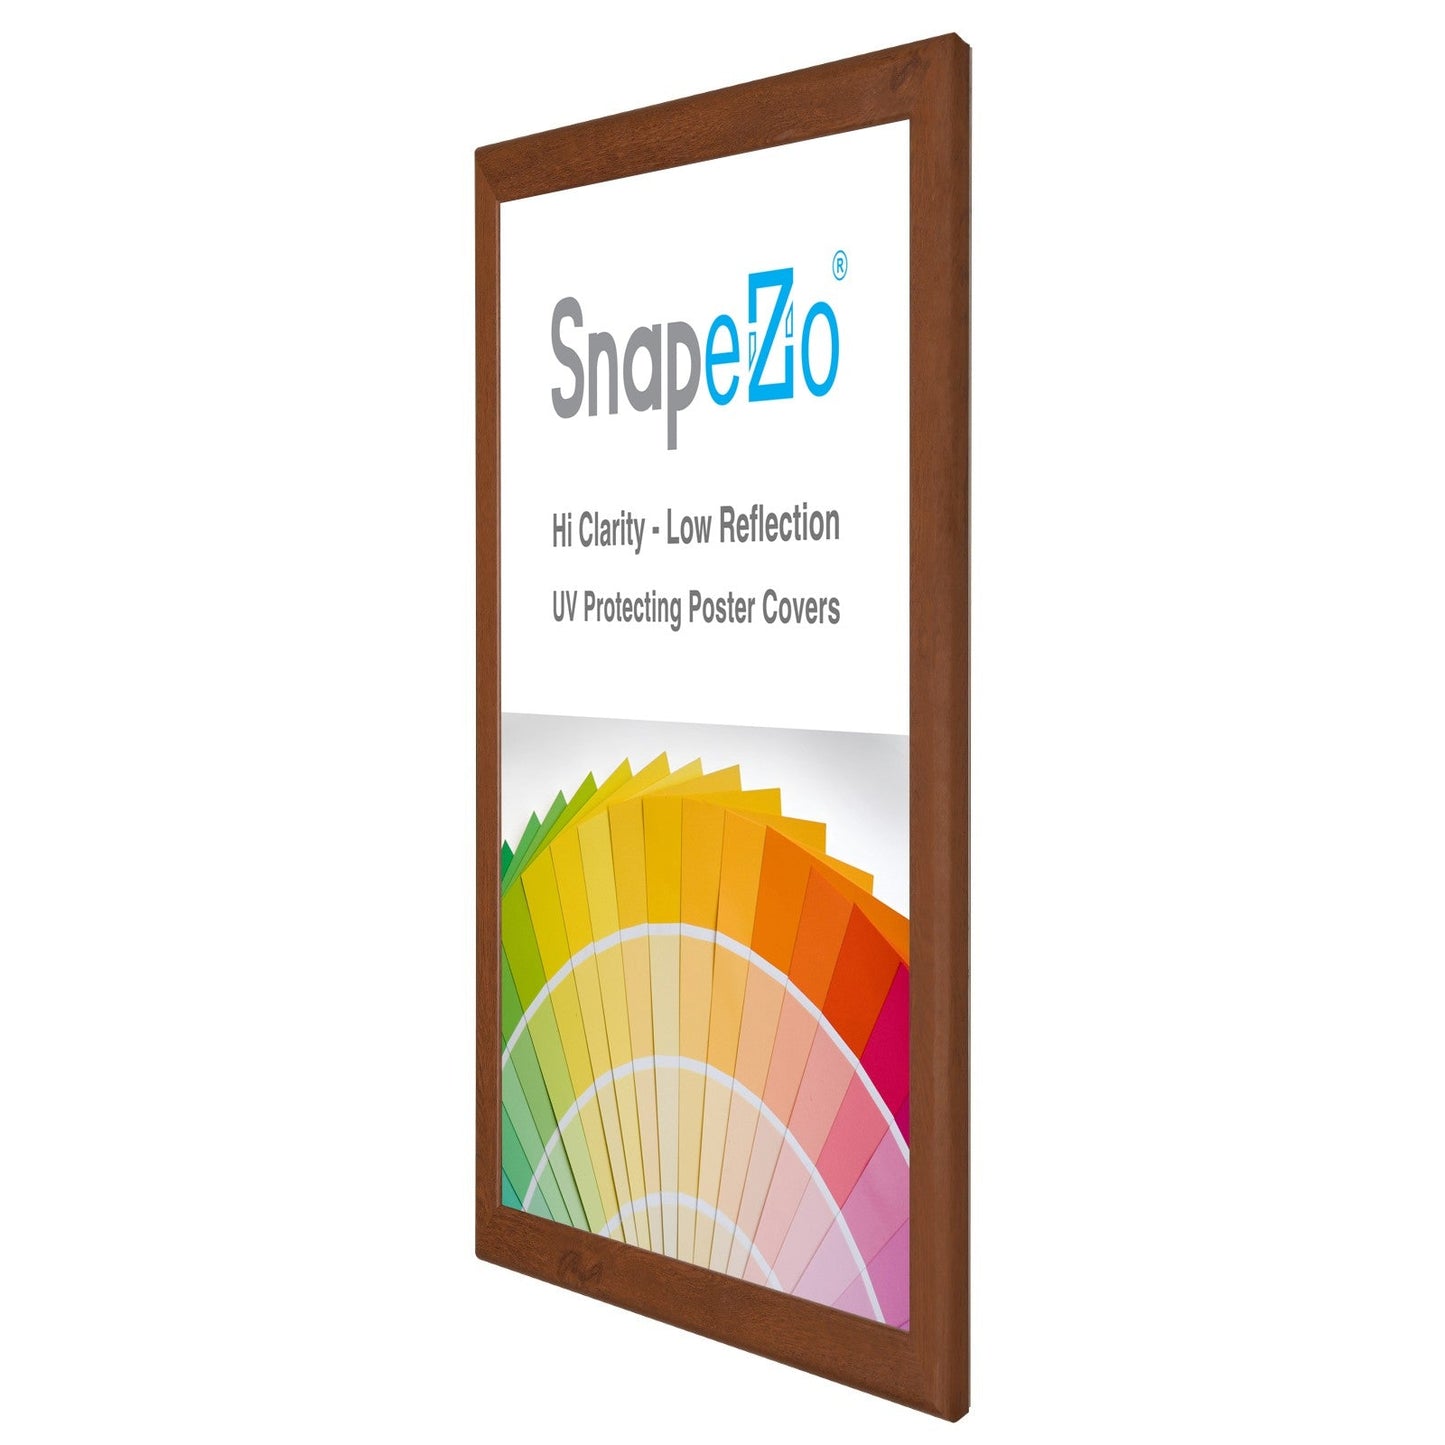 Load image into Gallery viewer, 36x48 Dark Wood SnapeZo® Snap Frame - 1.25&amp;quot; Profile
